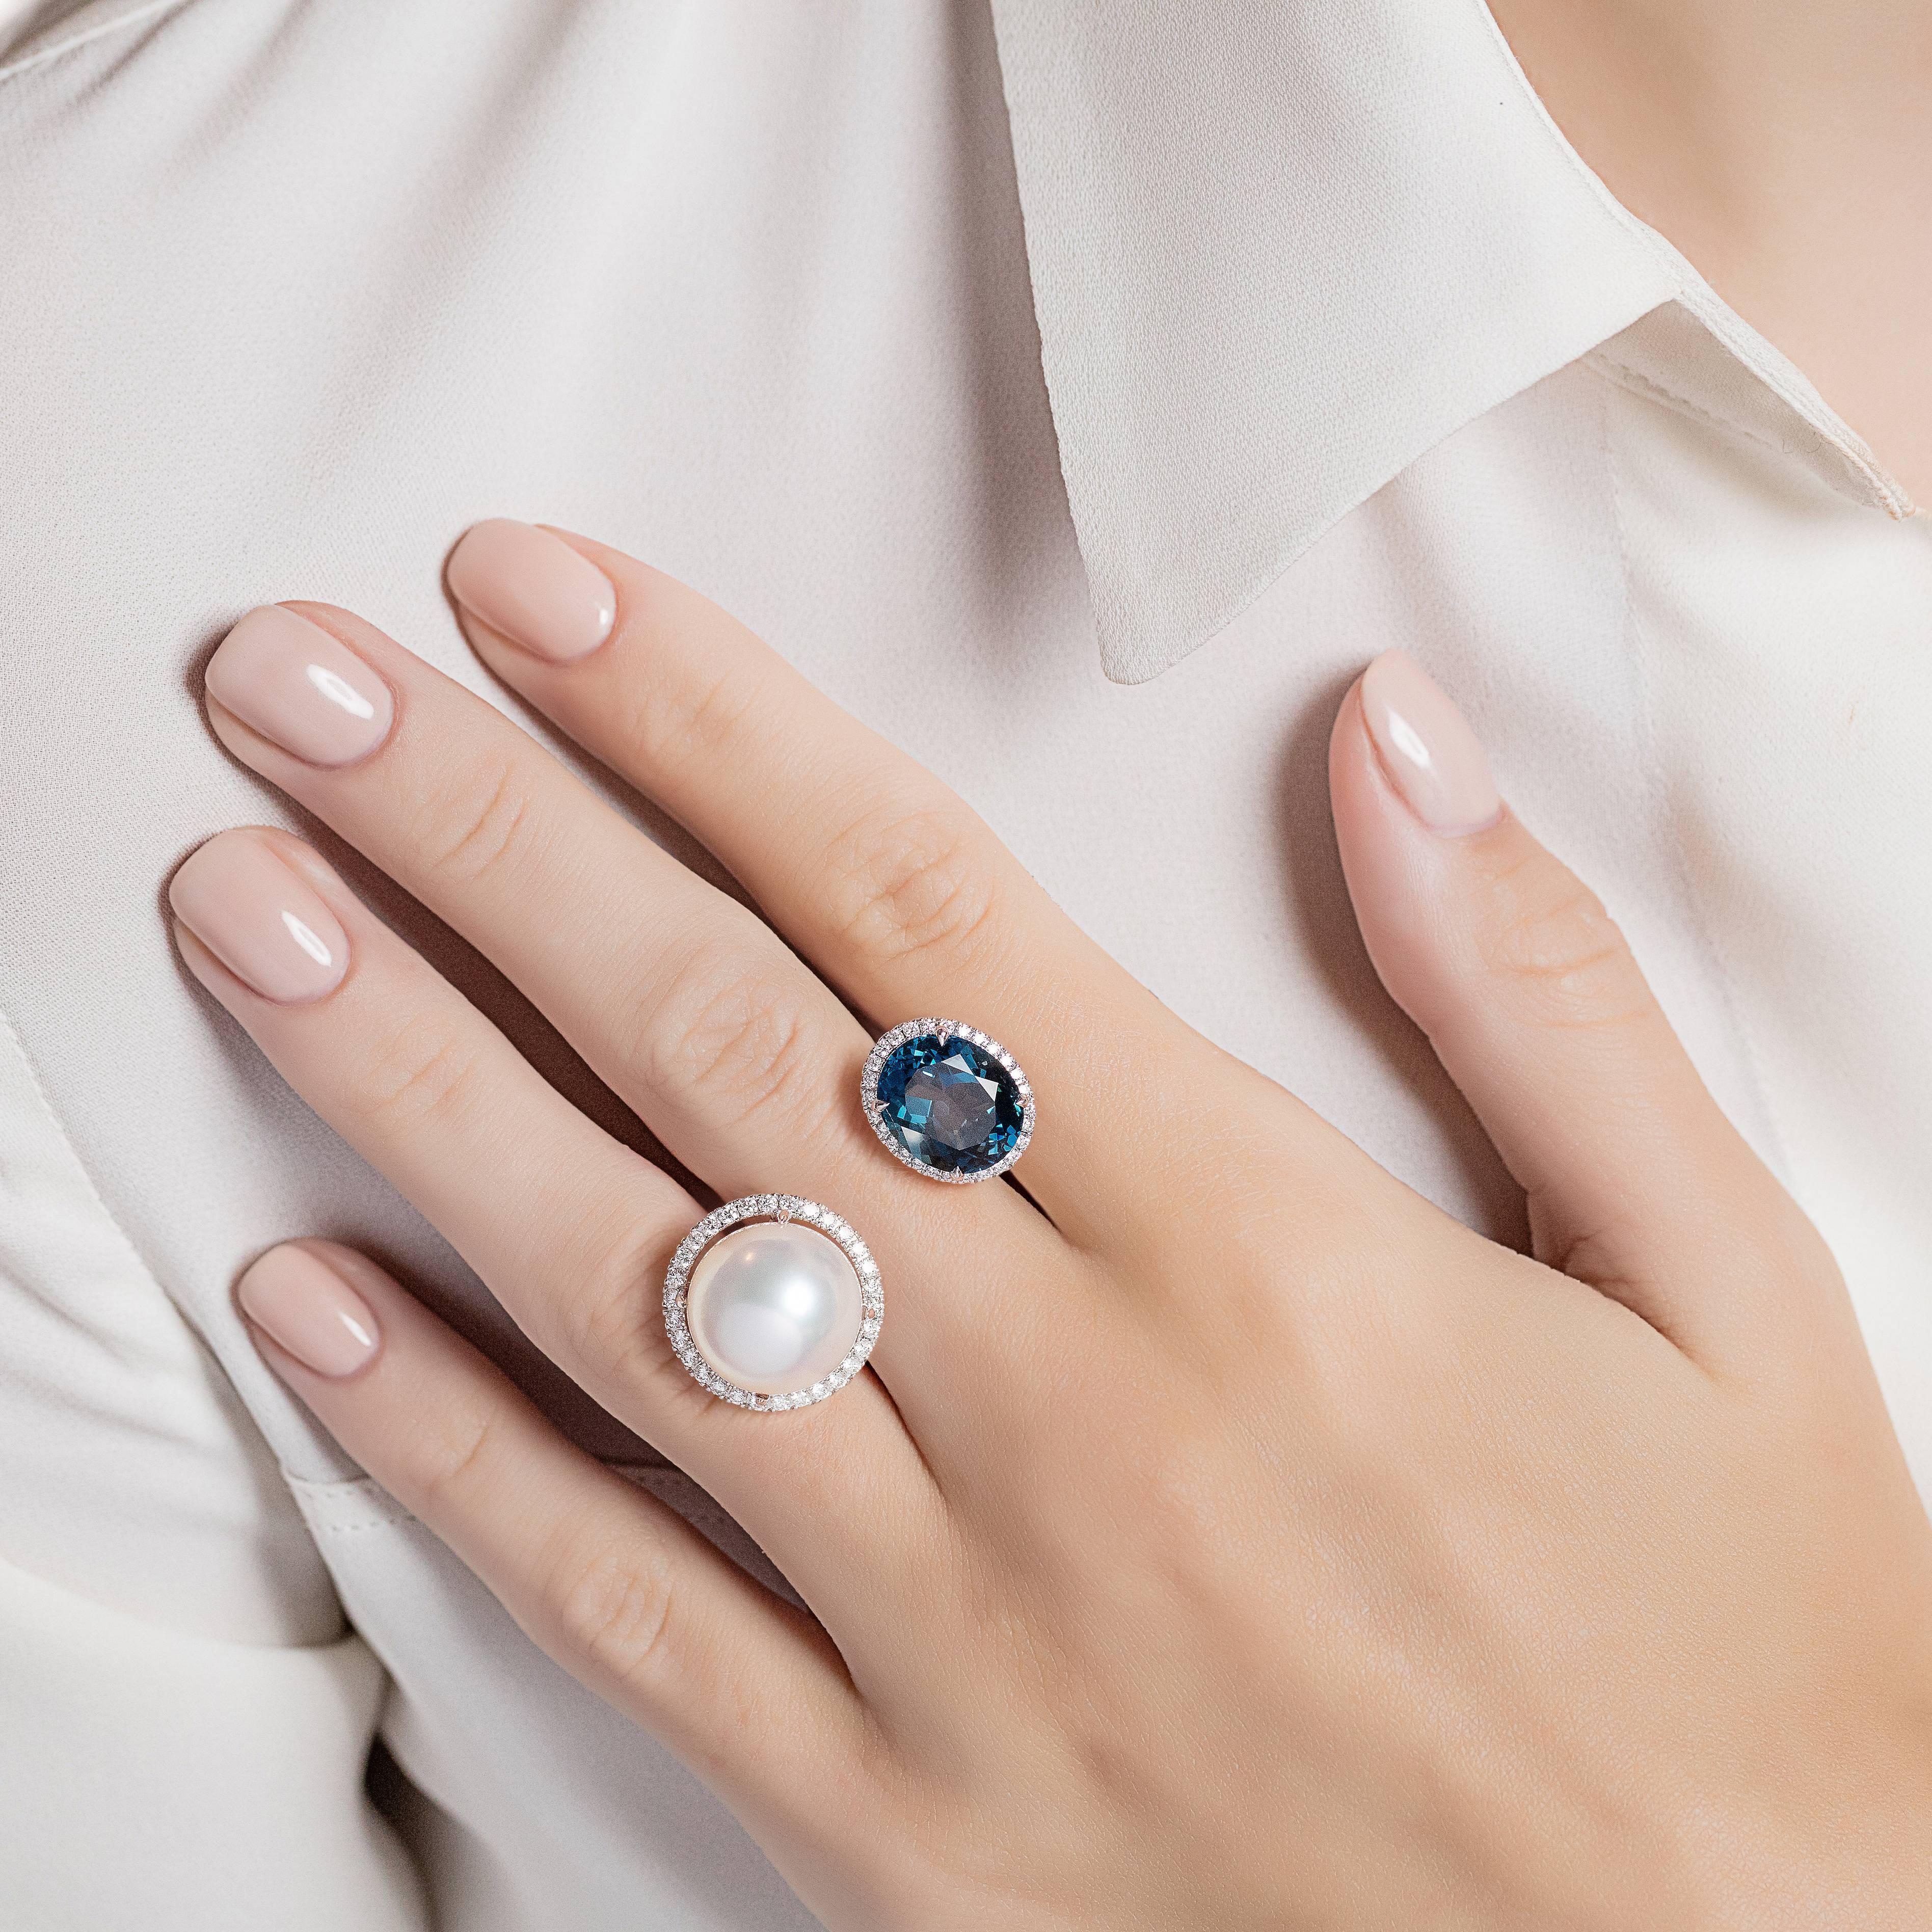 A striking between the finger ring made from white gold with blue topaz and a white south sea pearl, each surrounded with diamonds. The Elle et Lui collection symbolises the interaction of extremes – men and woman – which formed the basis for the